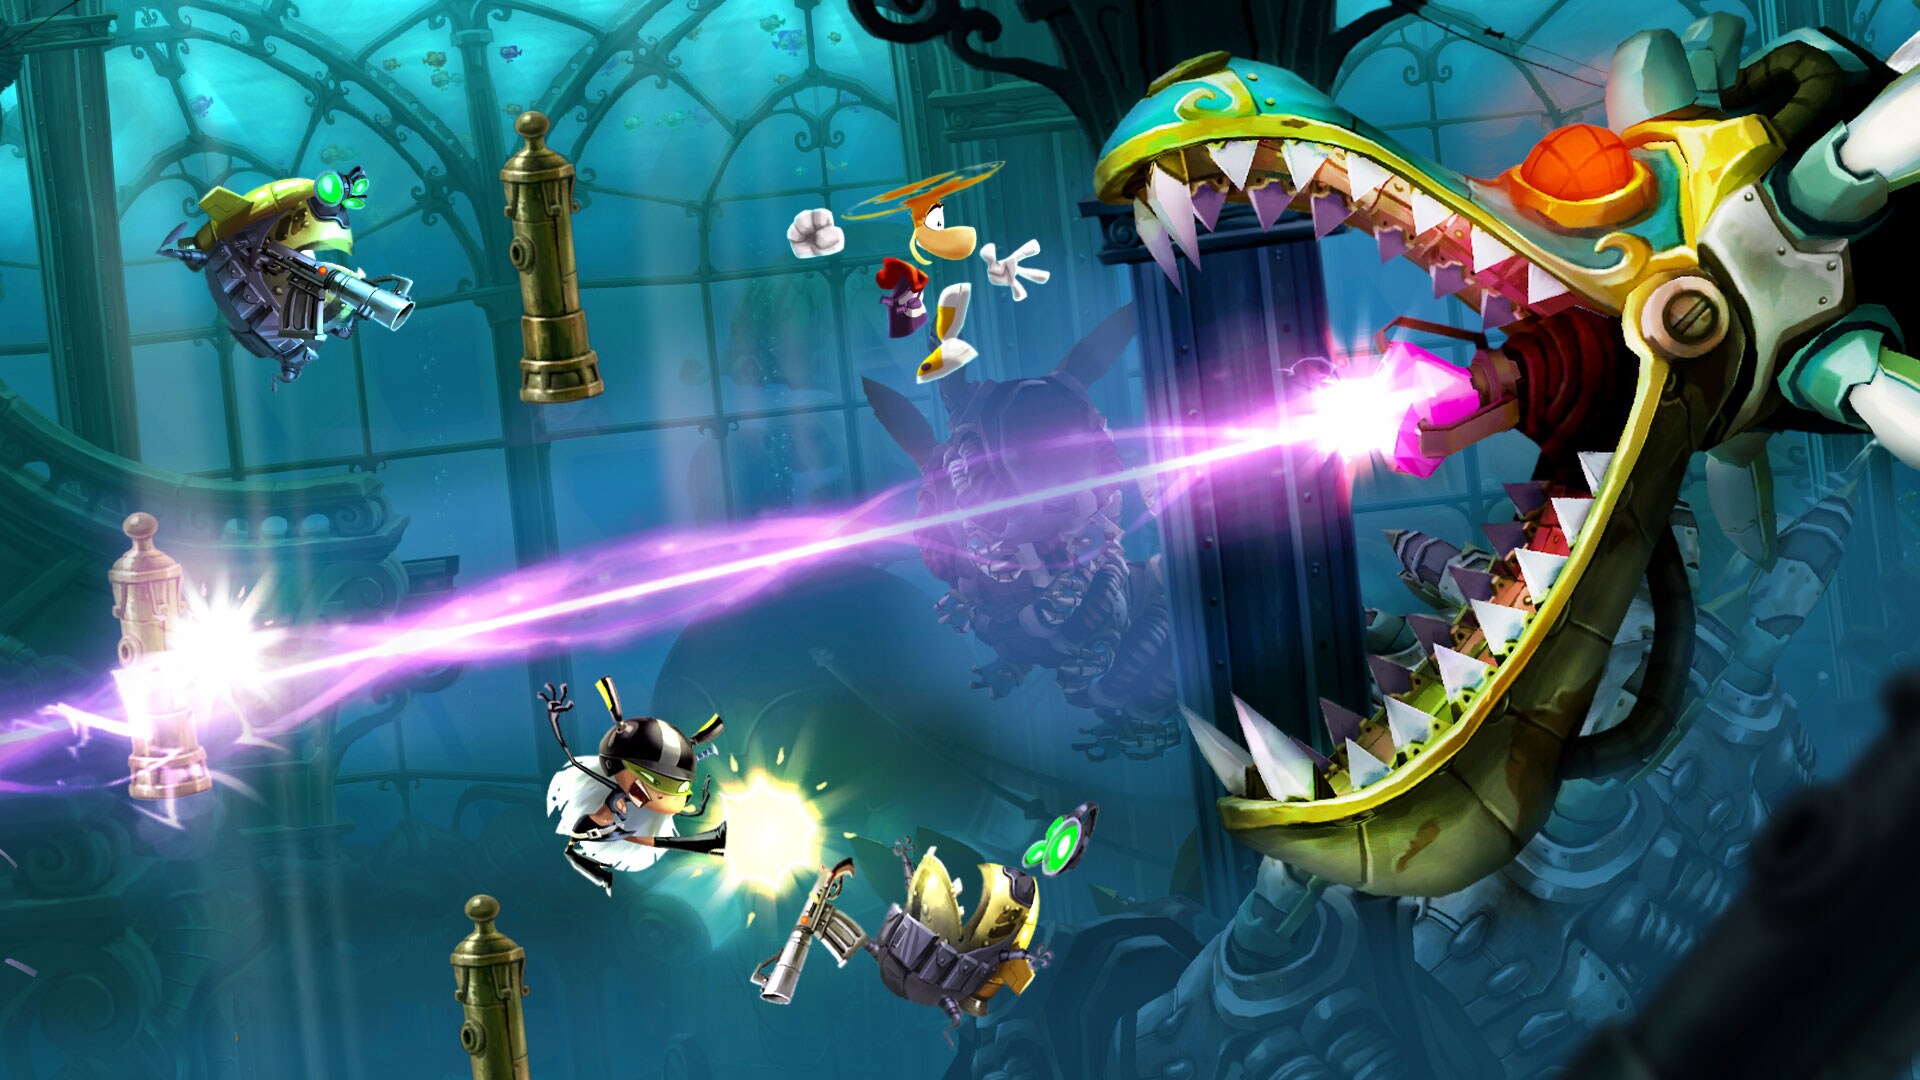 Games/Apps: Rayman Legends $14, Xbox One S bundles w/ For